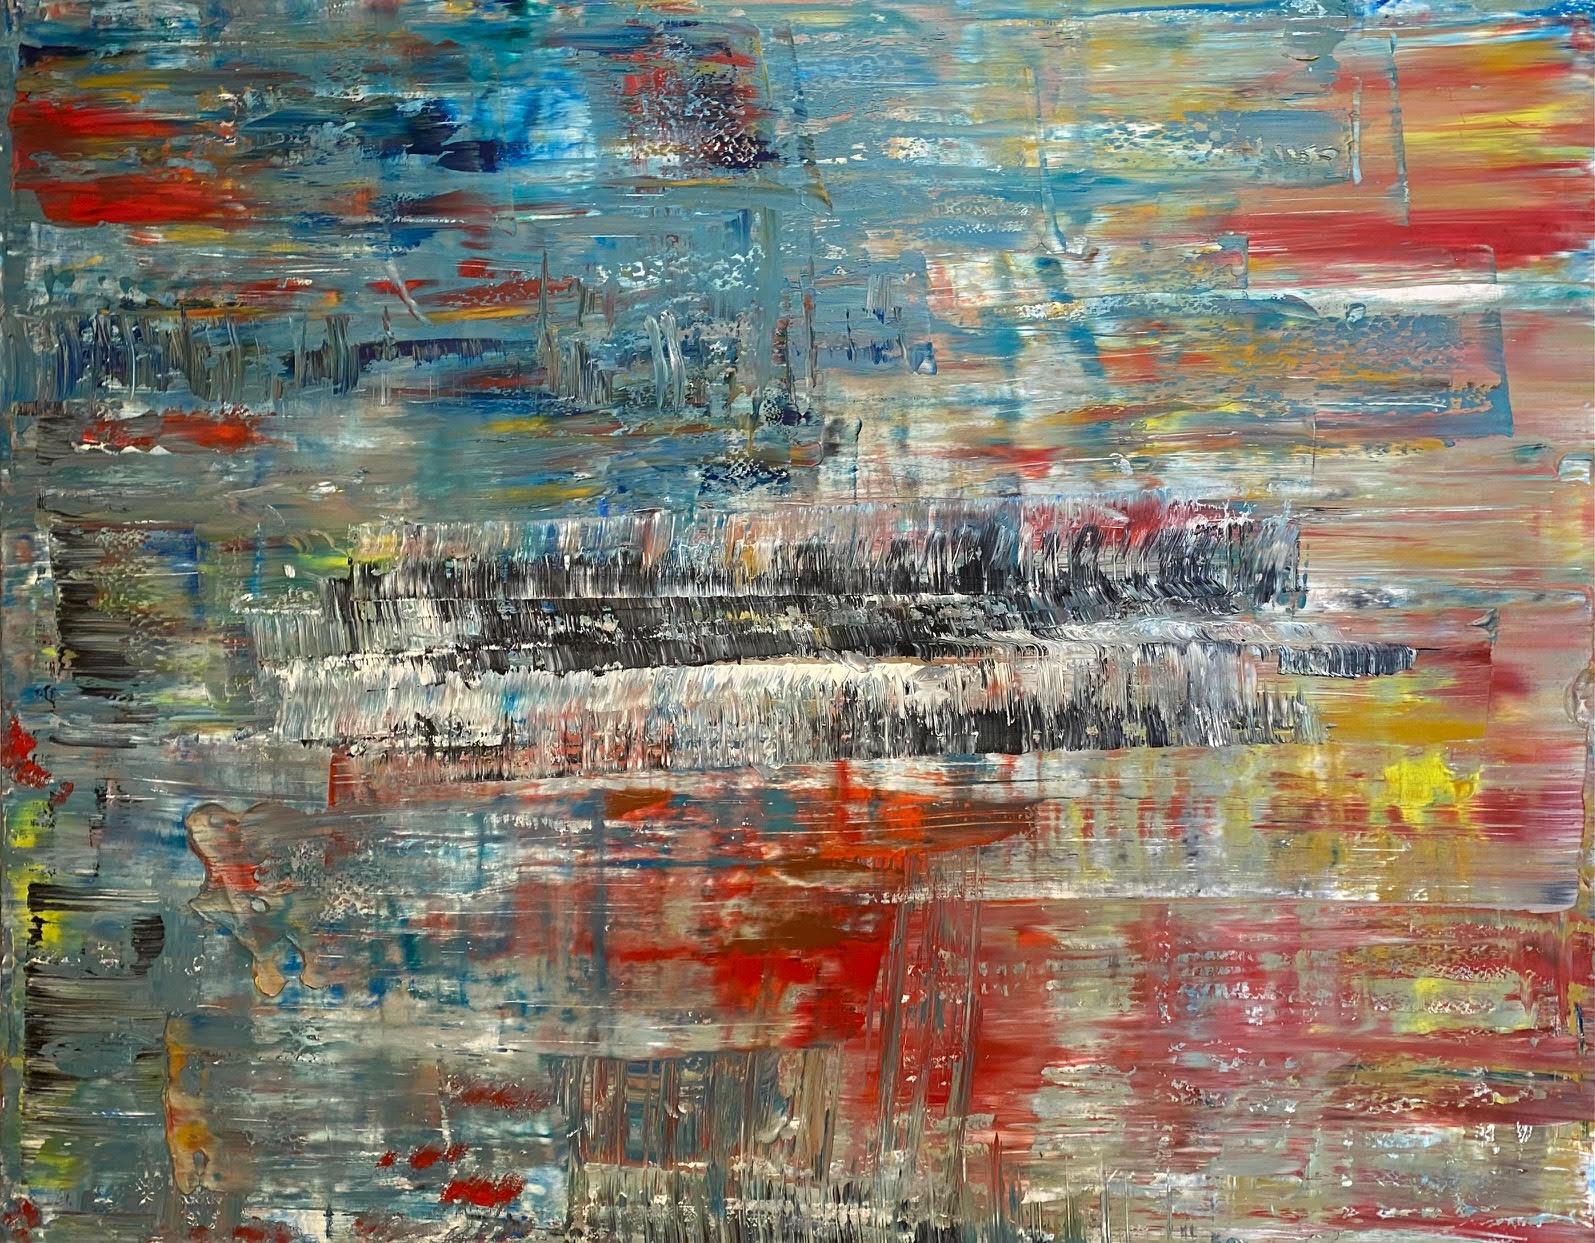 Frida Willis's "Harmony" is a 48" x 60" oil on canvas that captures the essence of abstract expressionism through its dynamic composition and emotive color scheme. Streaks of cool grays and blues merge with warm reds and yellows, creating a visual